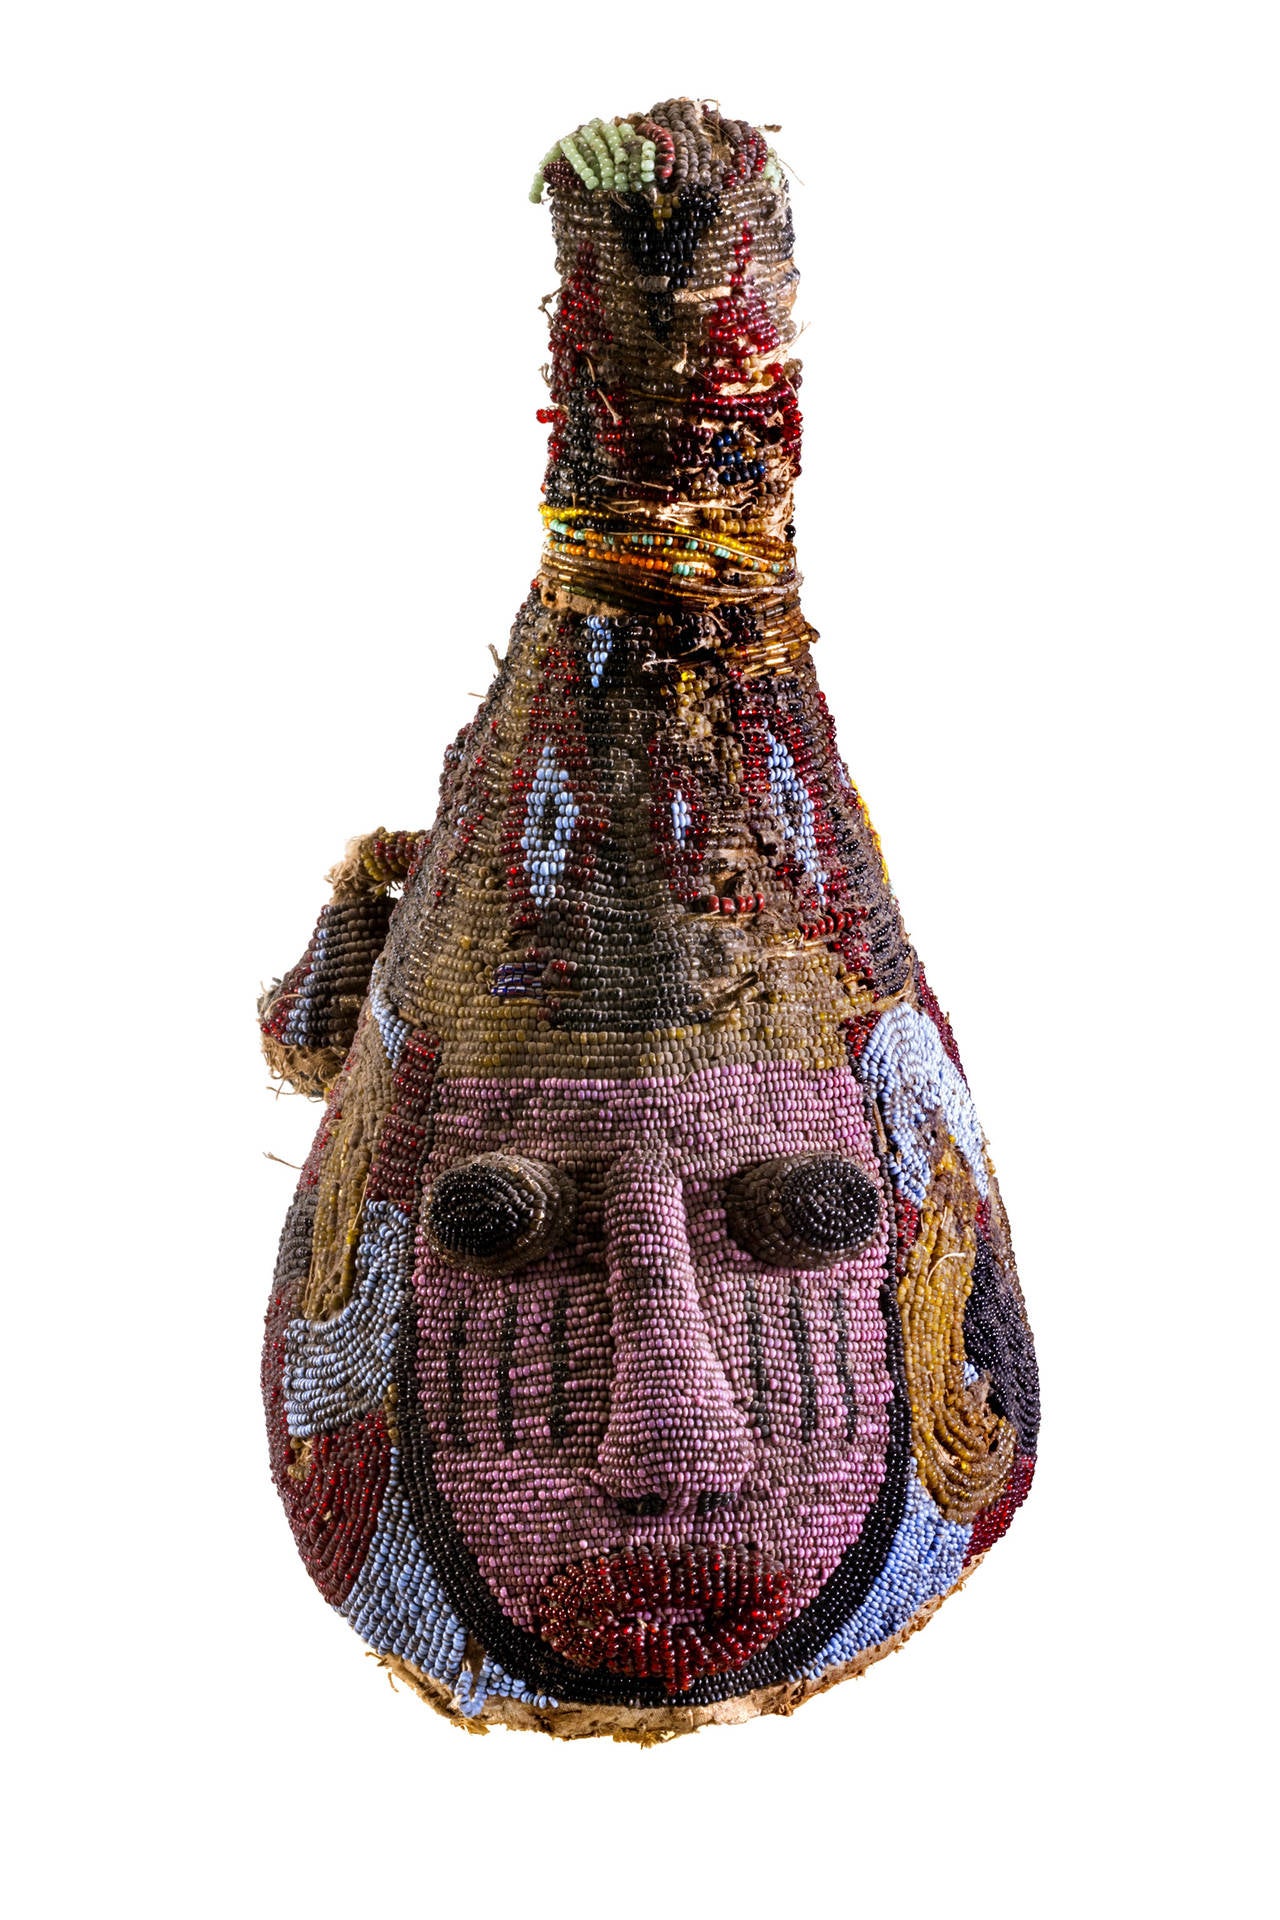 This is one of the old small beaded Yoruba mask from Nigeria. With the face of OBA (King), Eva lasting symbol on one side and birds. The birds are protective of the king. These hats are part of healing costumes worn by a king and Yoruba priest’s